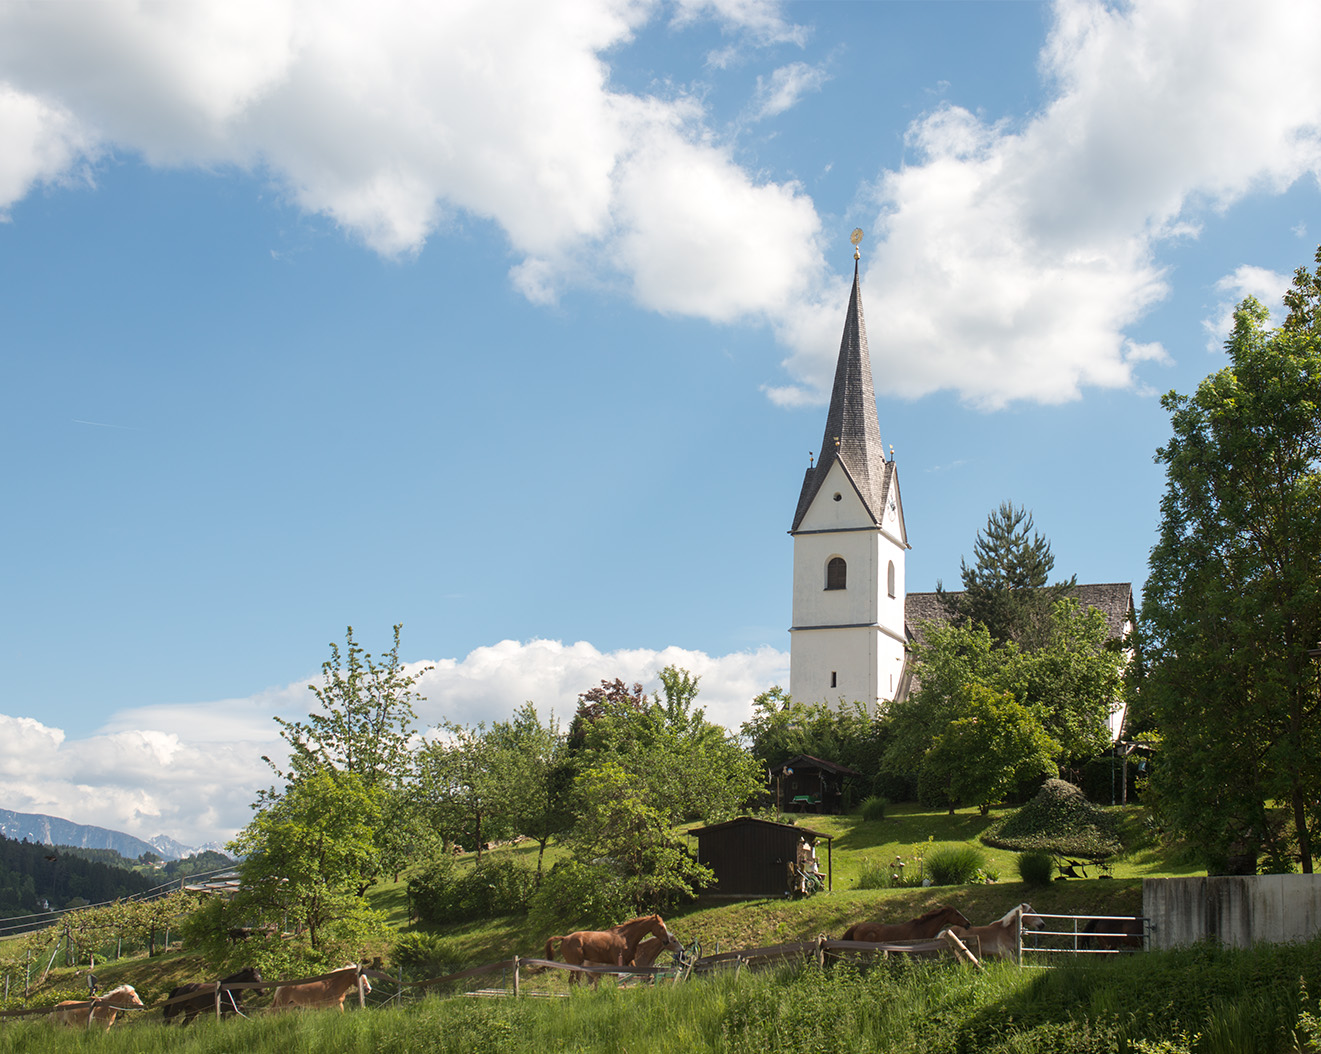 a church spire is shown on a grassy hillside with a herd of cows